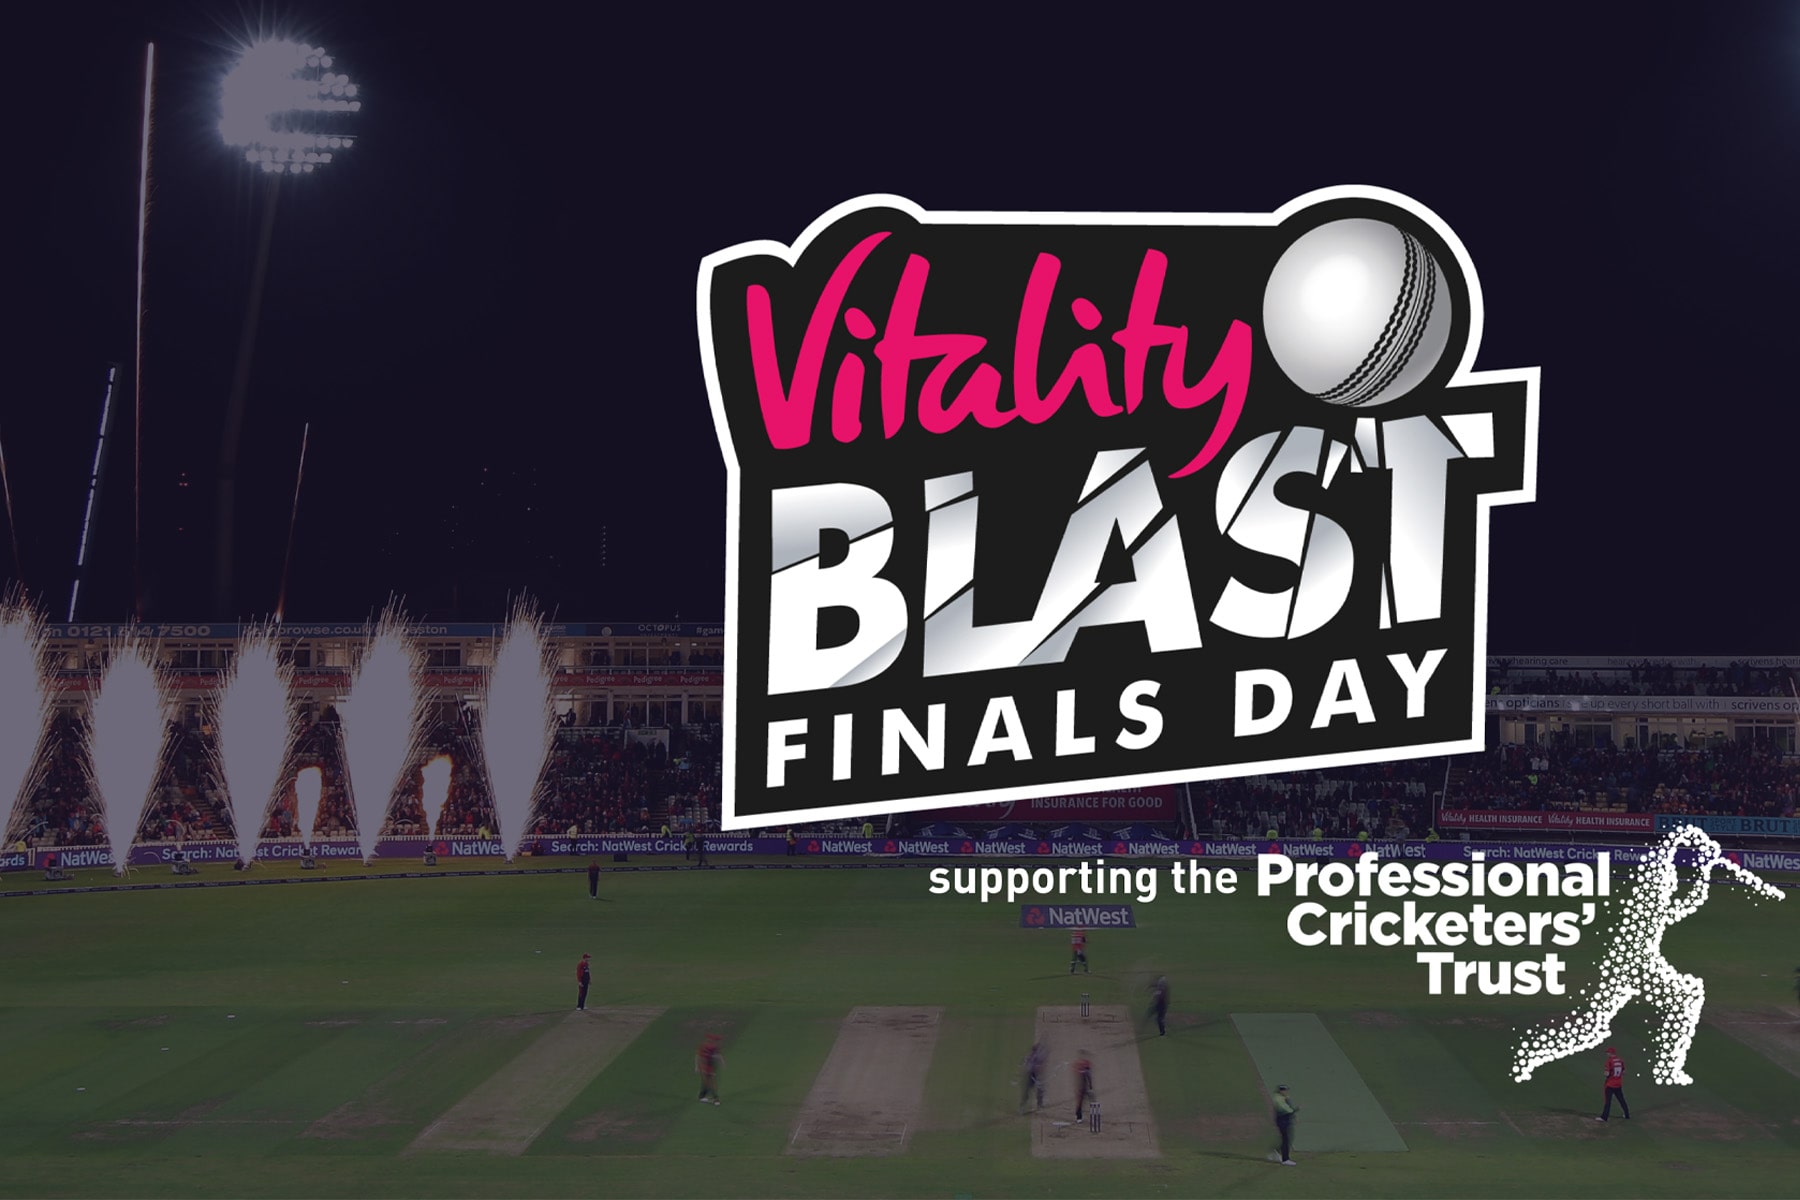 Vitality Blast Finals Day to support Trust once again